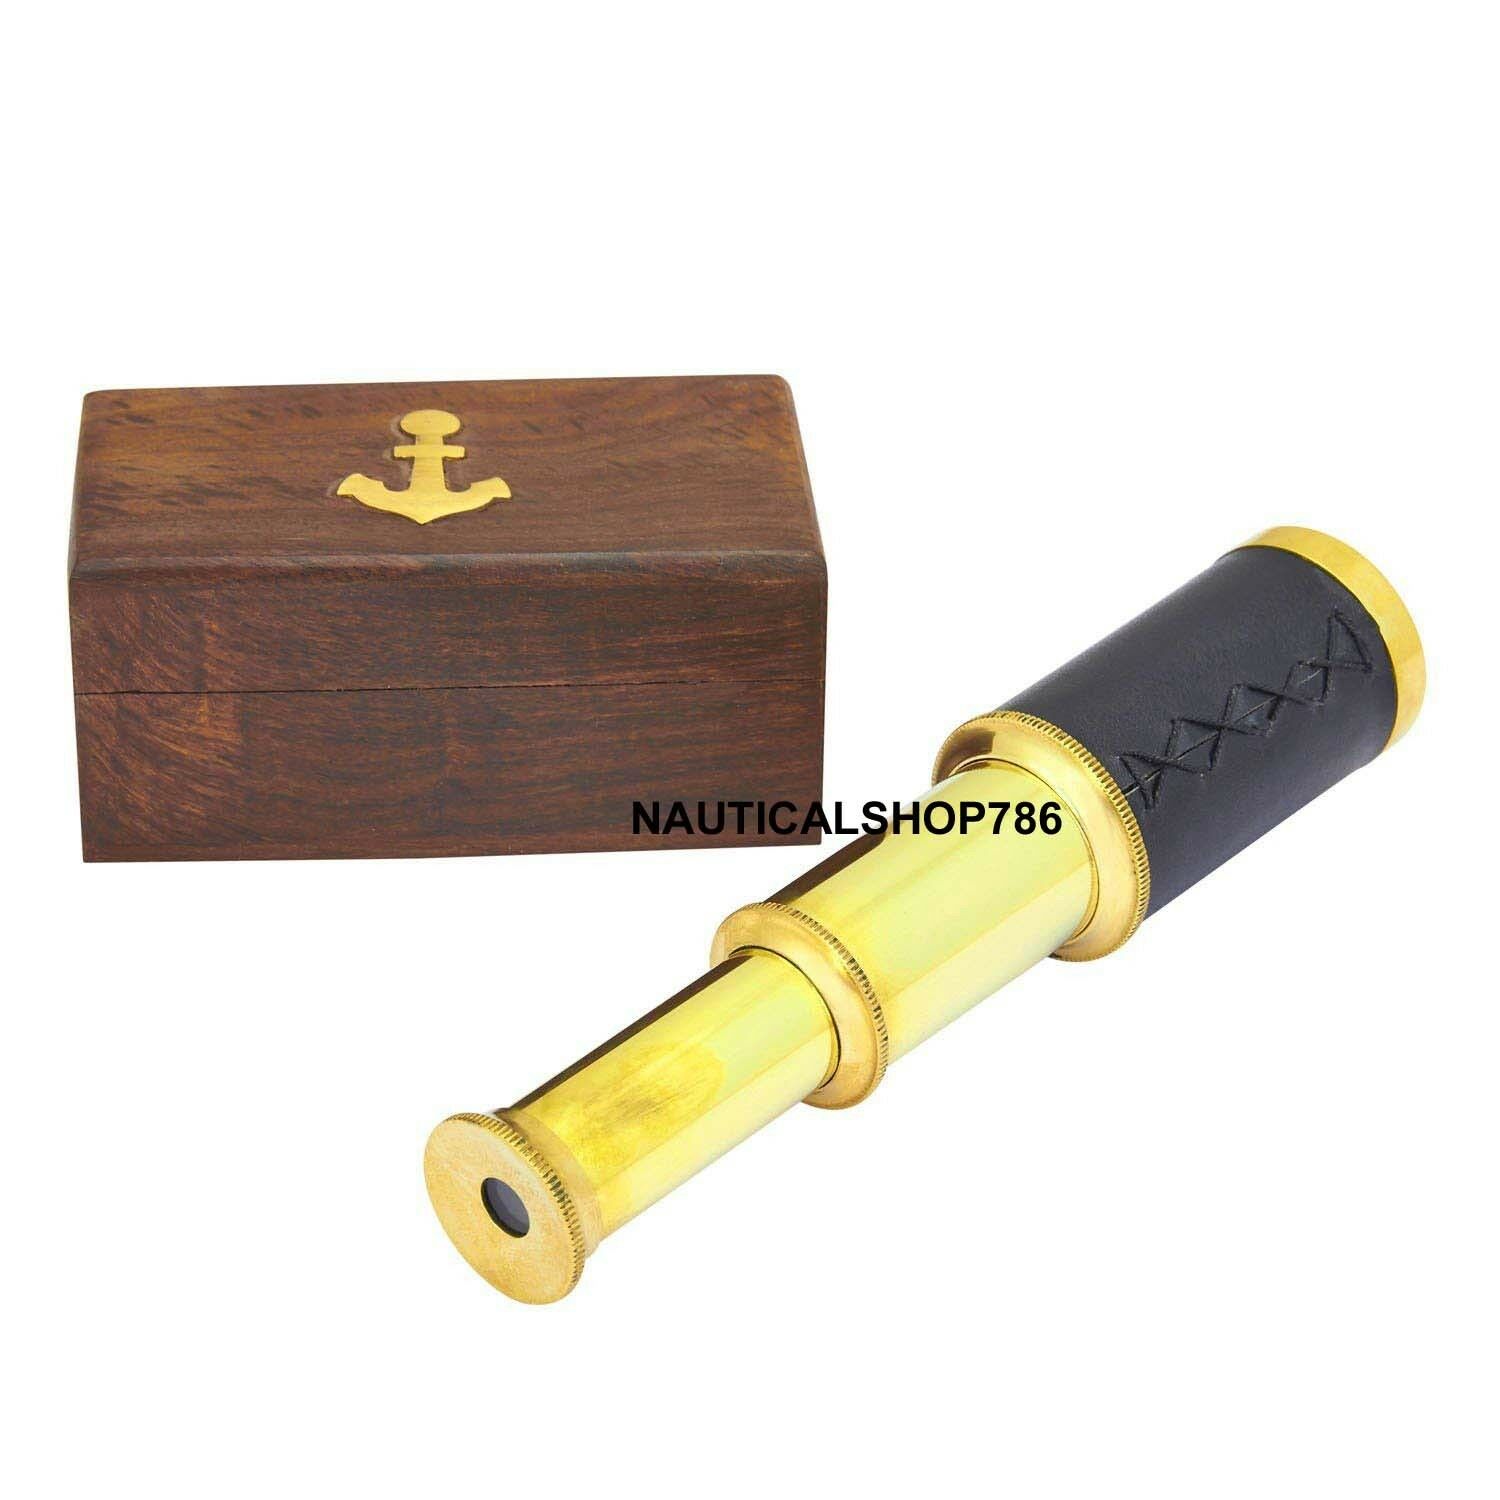 Nautical Vintage Marine Brass Telescope Black Leather For Gifting Item With Box